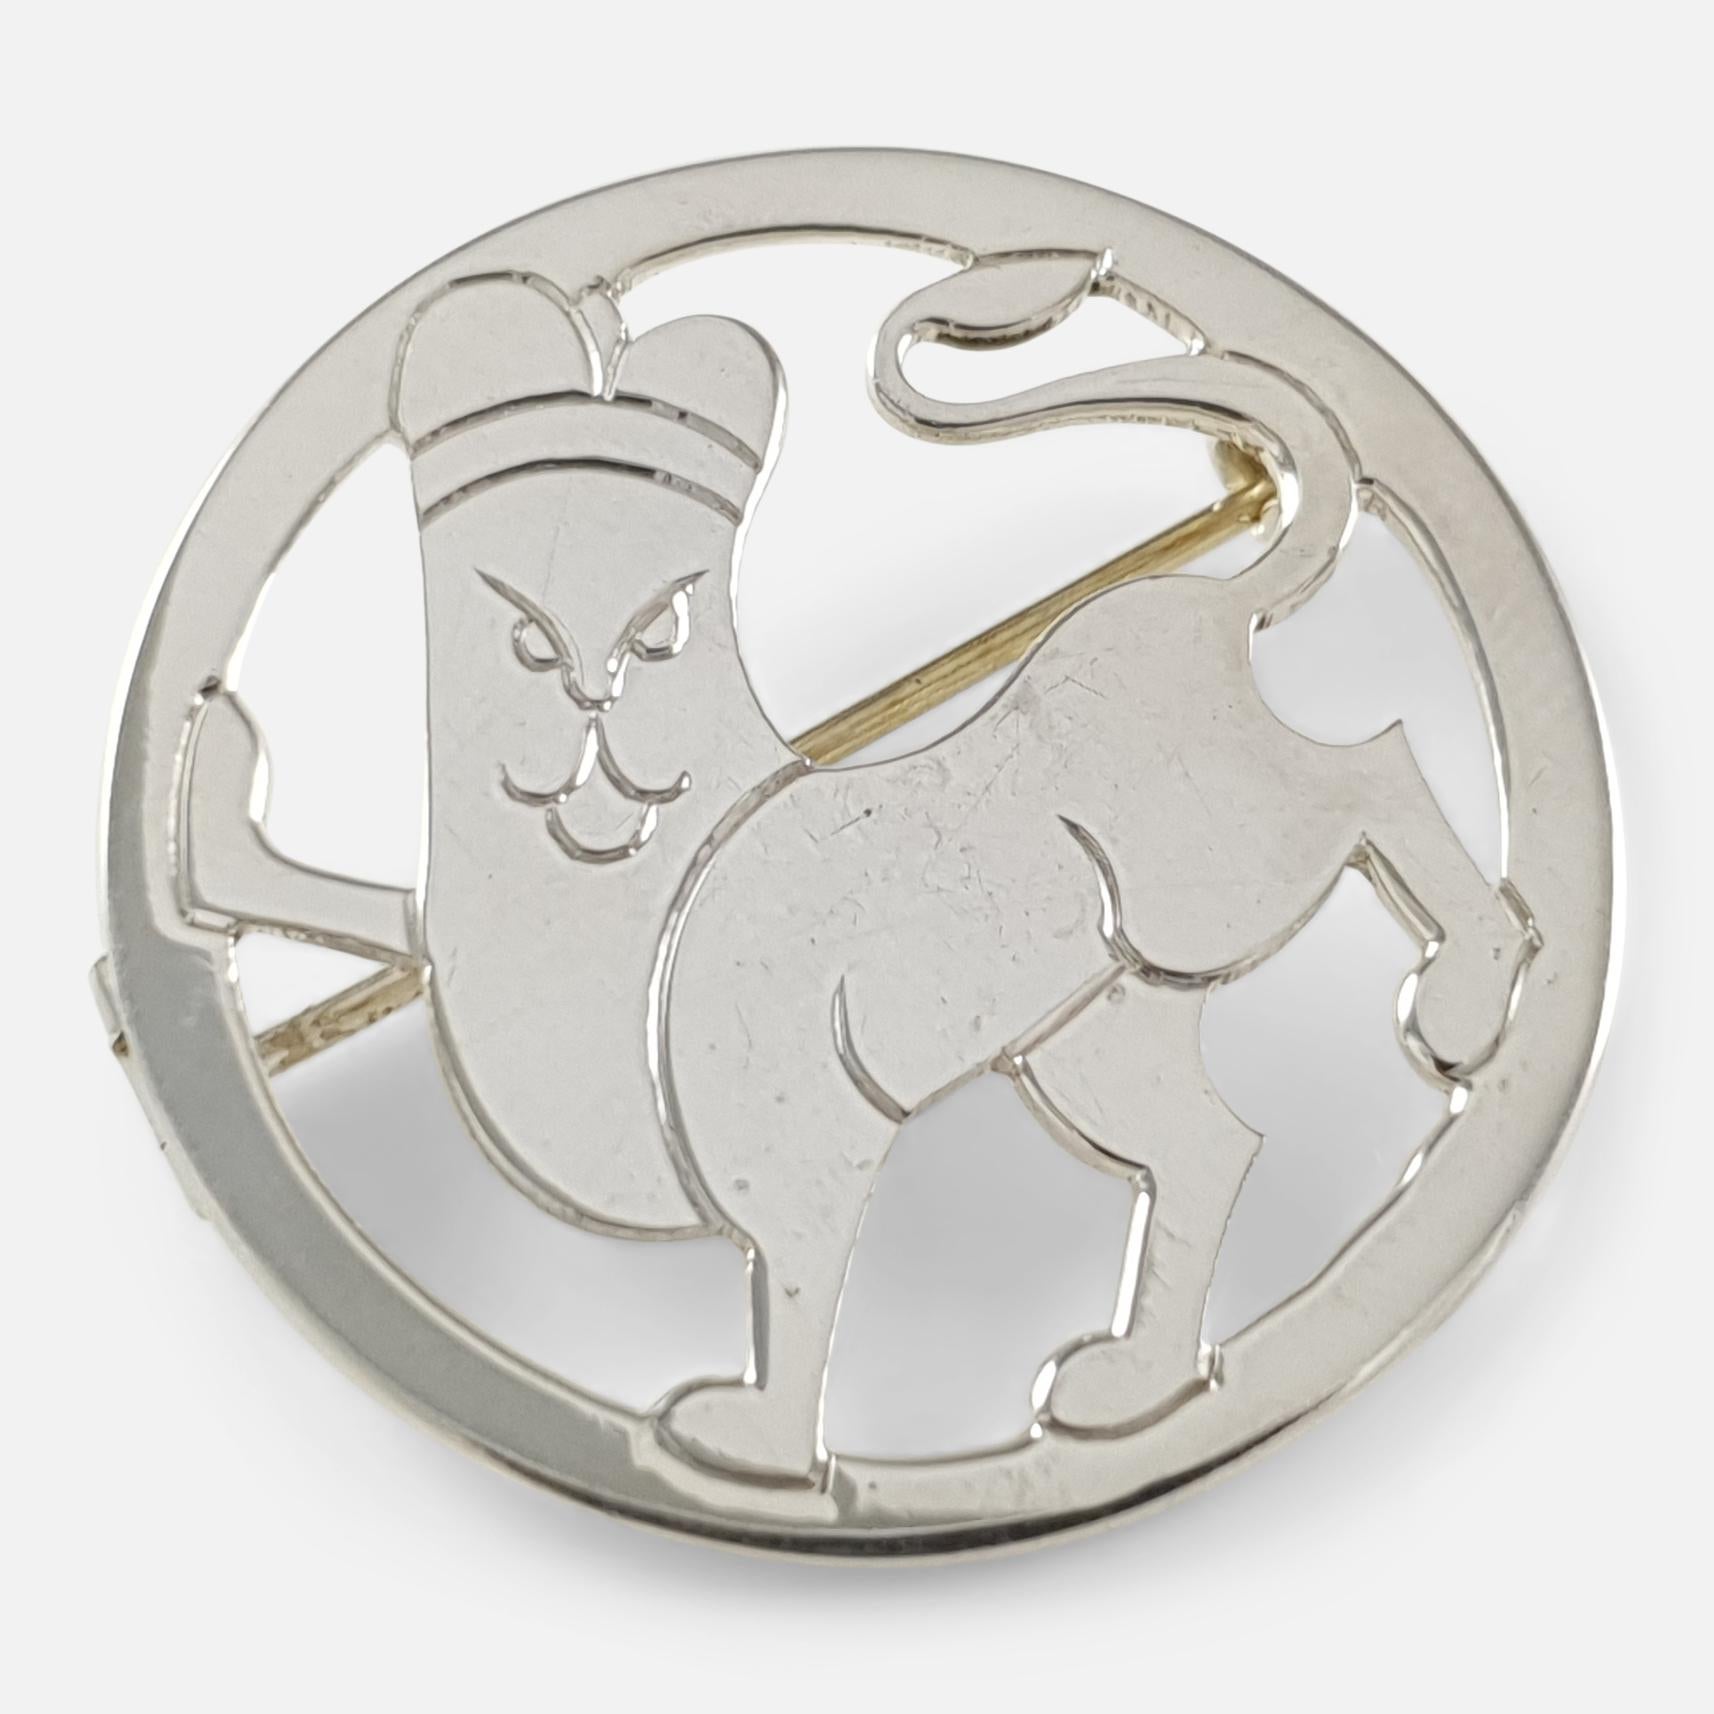 An Art Deco sterling silver brooch in the form of a lion by H.G. Murphy. The brooch is stamped with London hallmarks for 1933, and the maker's mark 